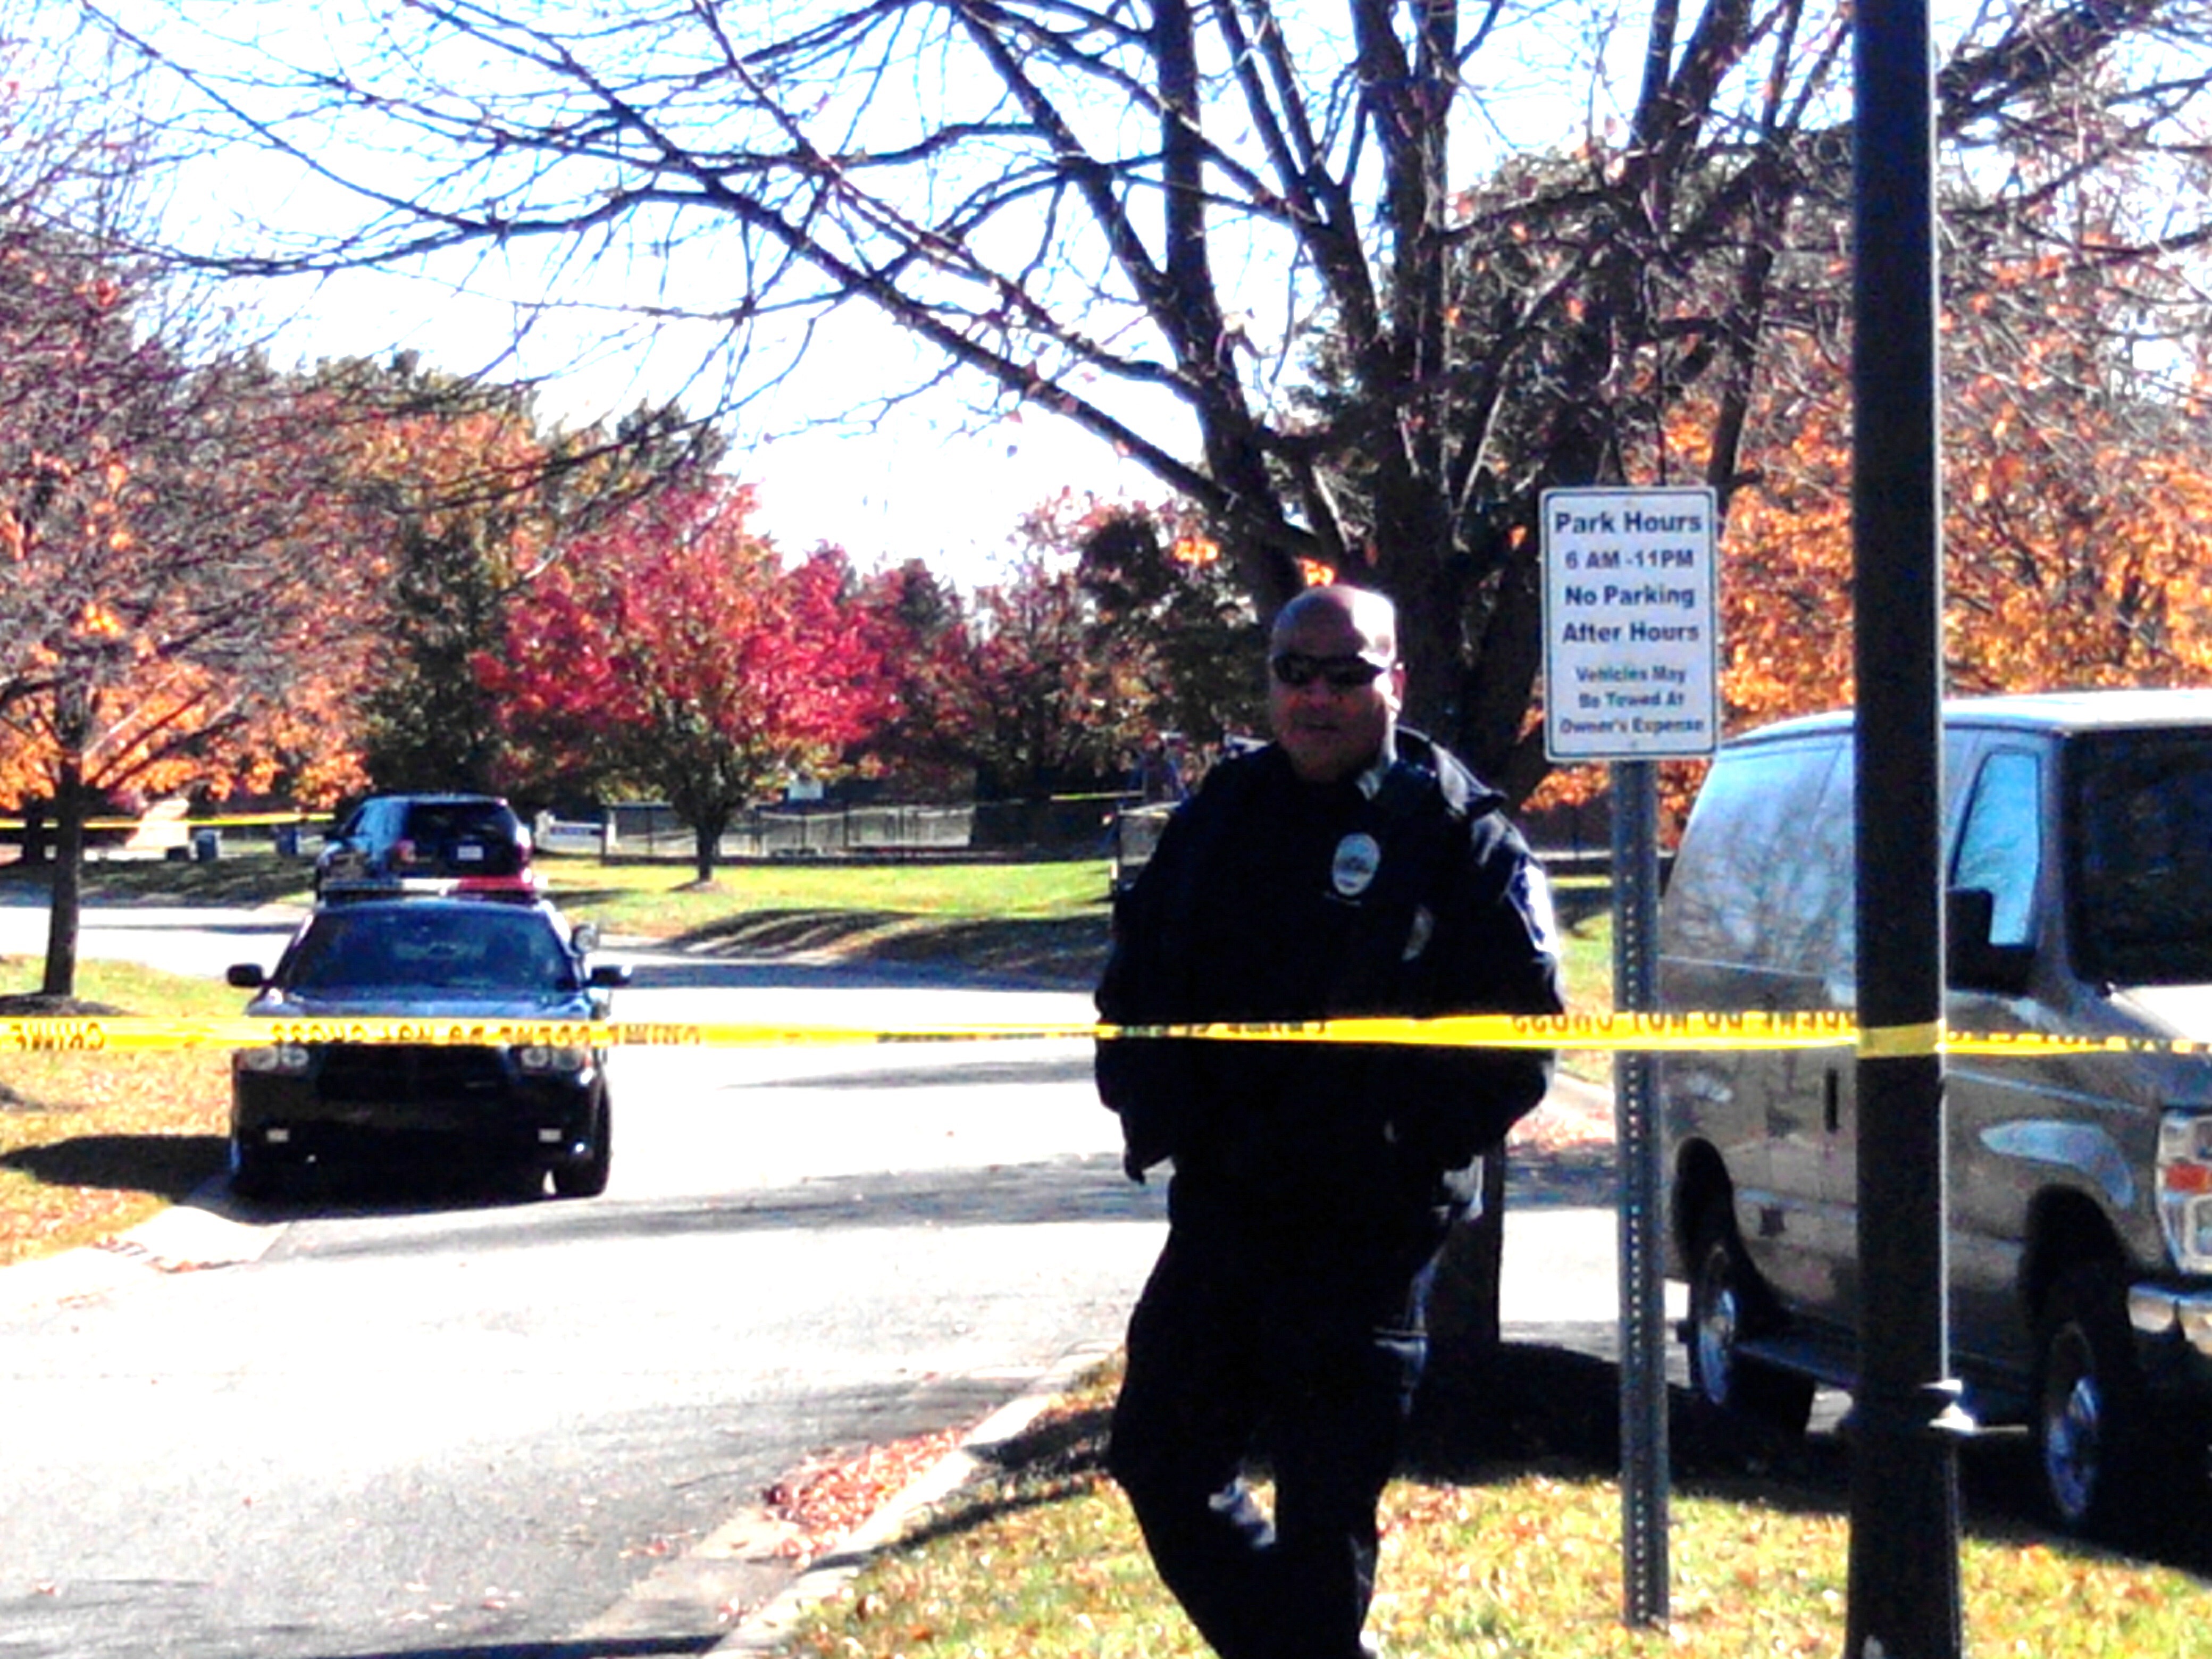 Fishers Police have cordoned off the entrance to Windermere Park at Windermere Blvd. and Parkway Dr. in the area of 96th and Mollenkopf after a man's body was found there around 7p.m. Saturdayt, Nov. 1st.